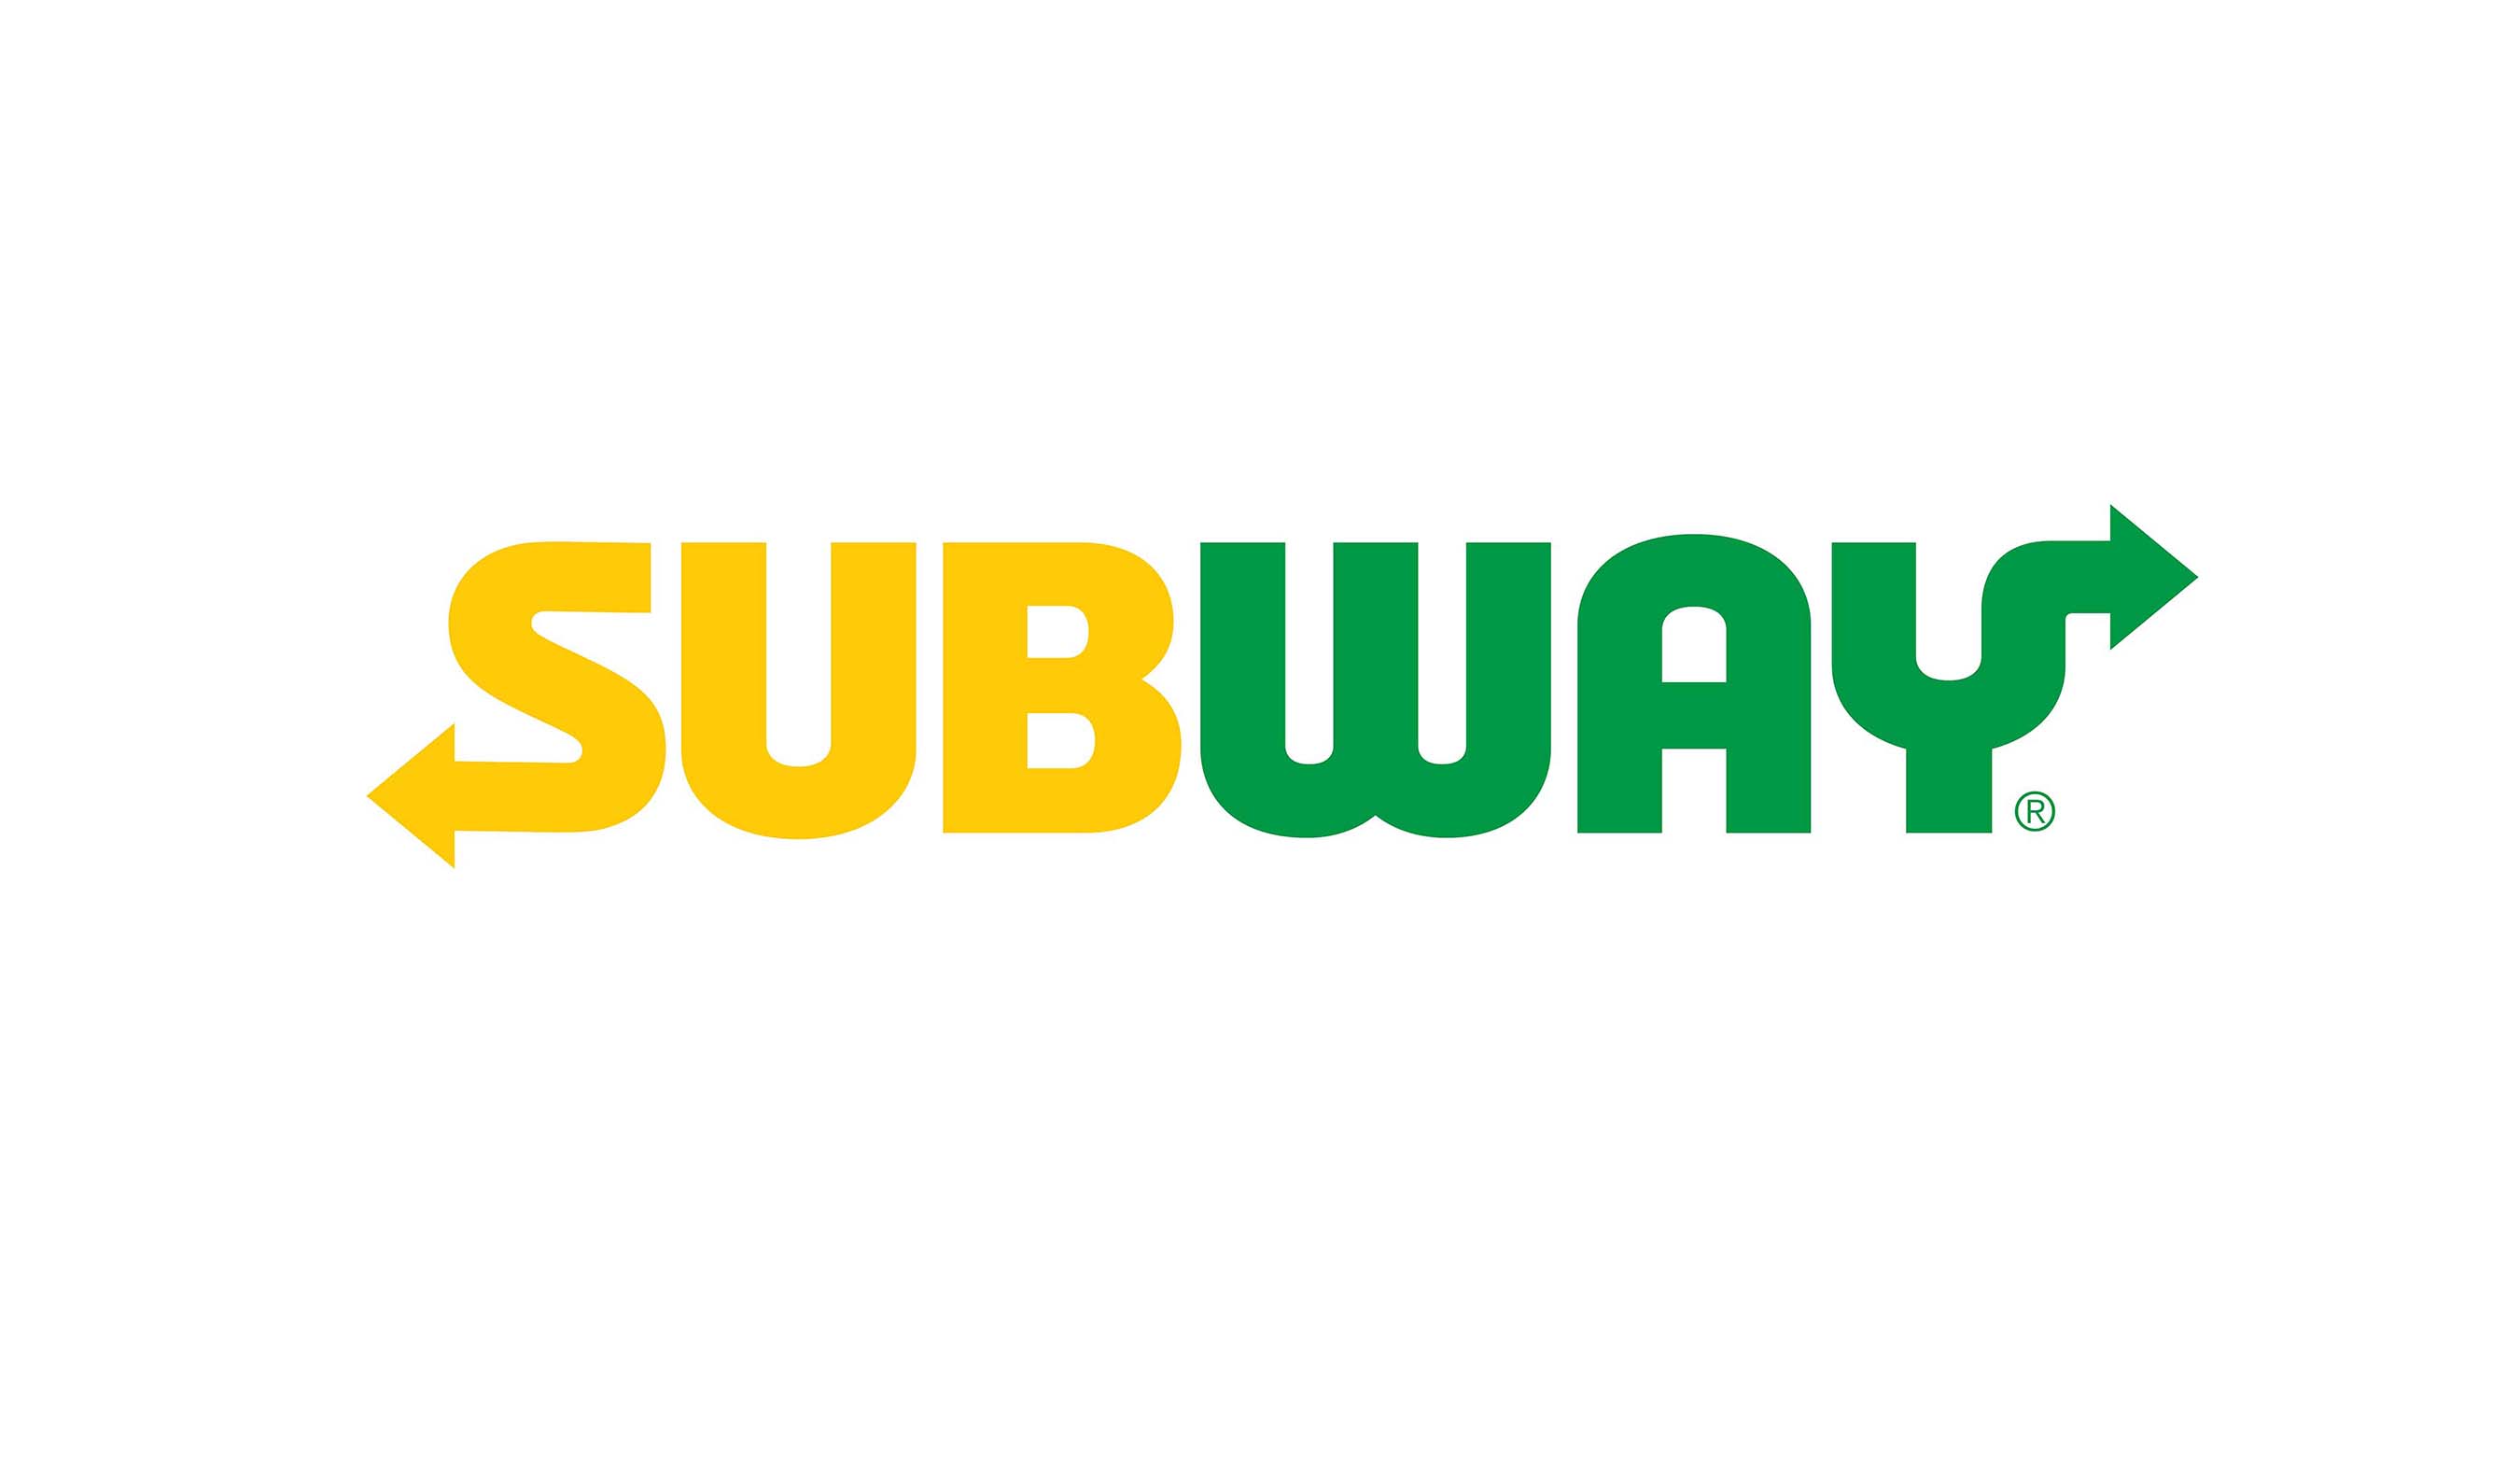 Subway Franchise for Sale - Limited Hours Easy to Operate